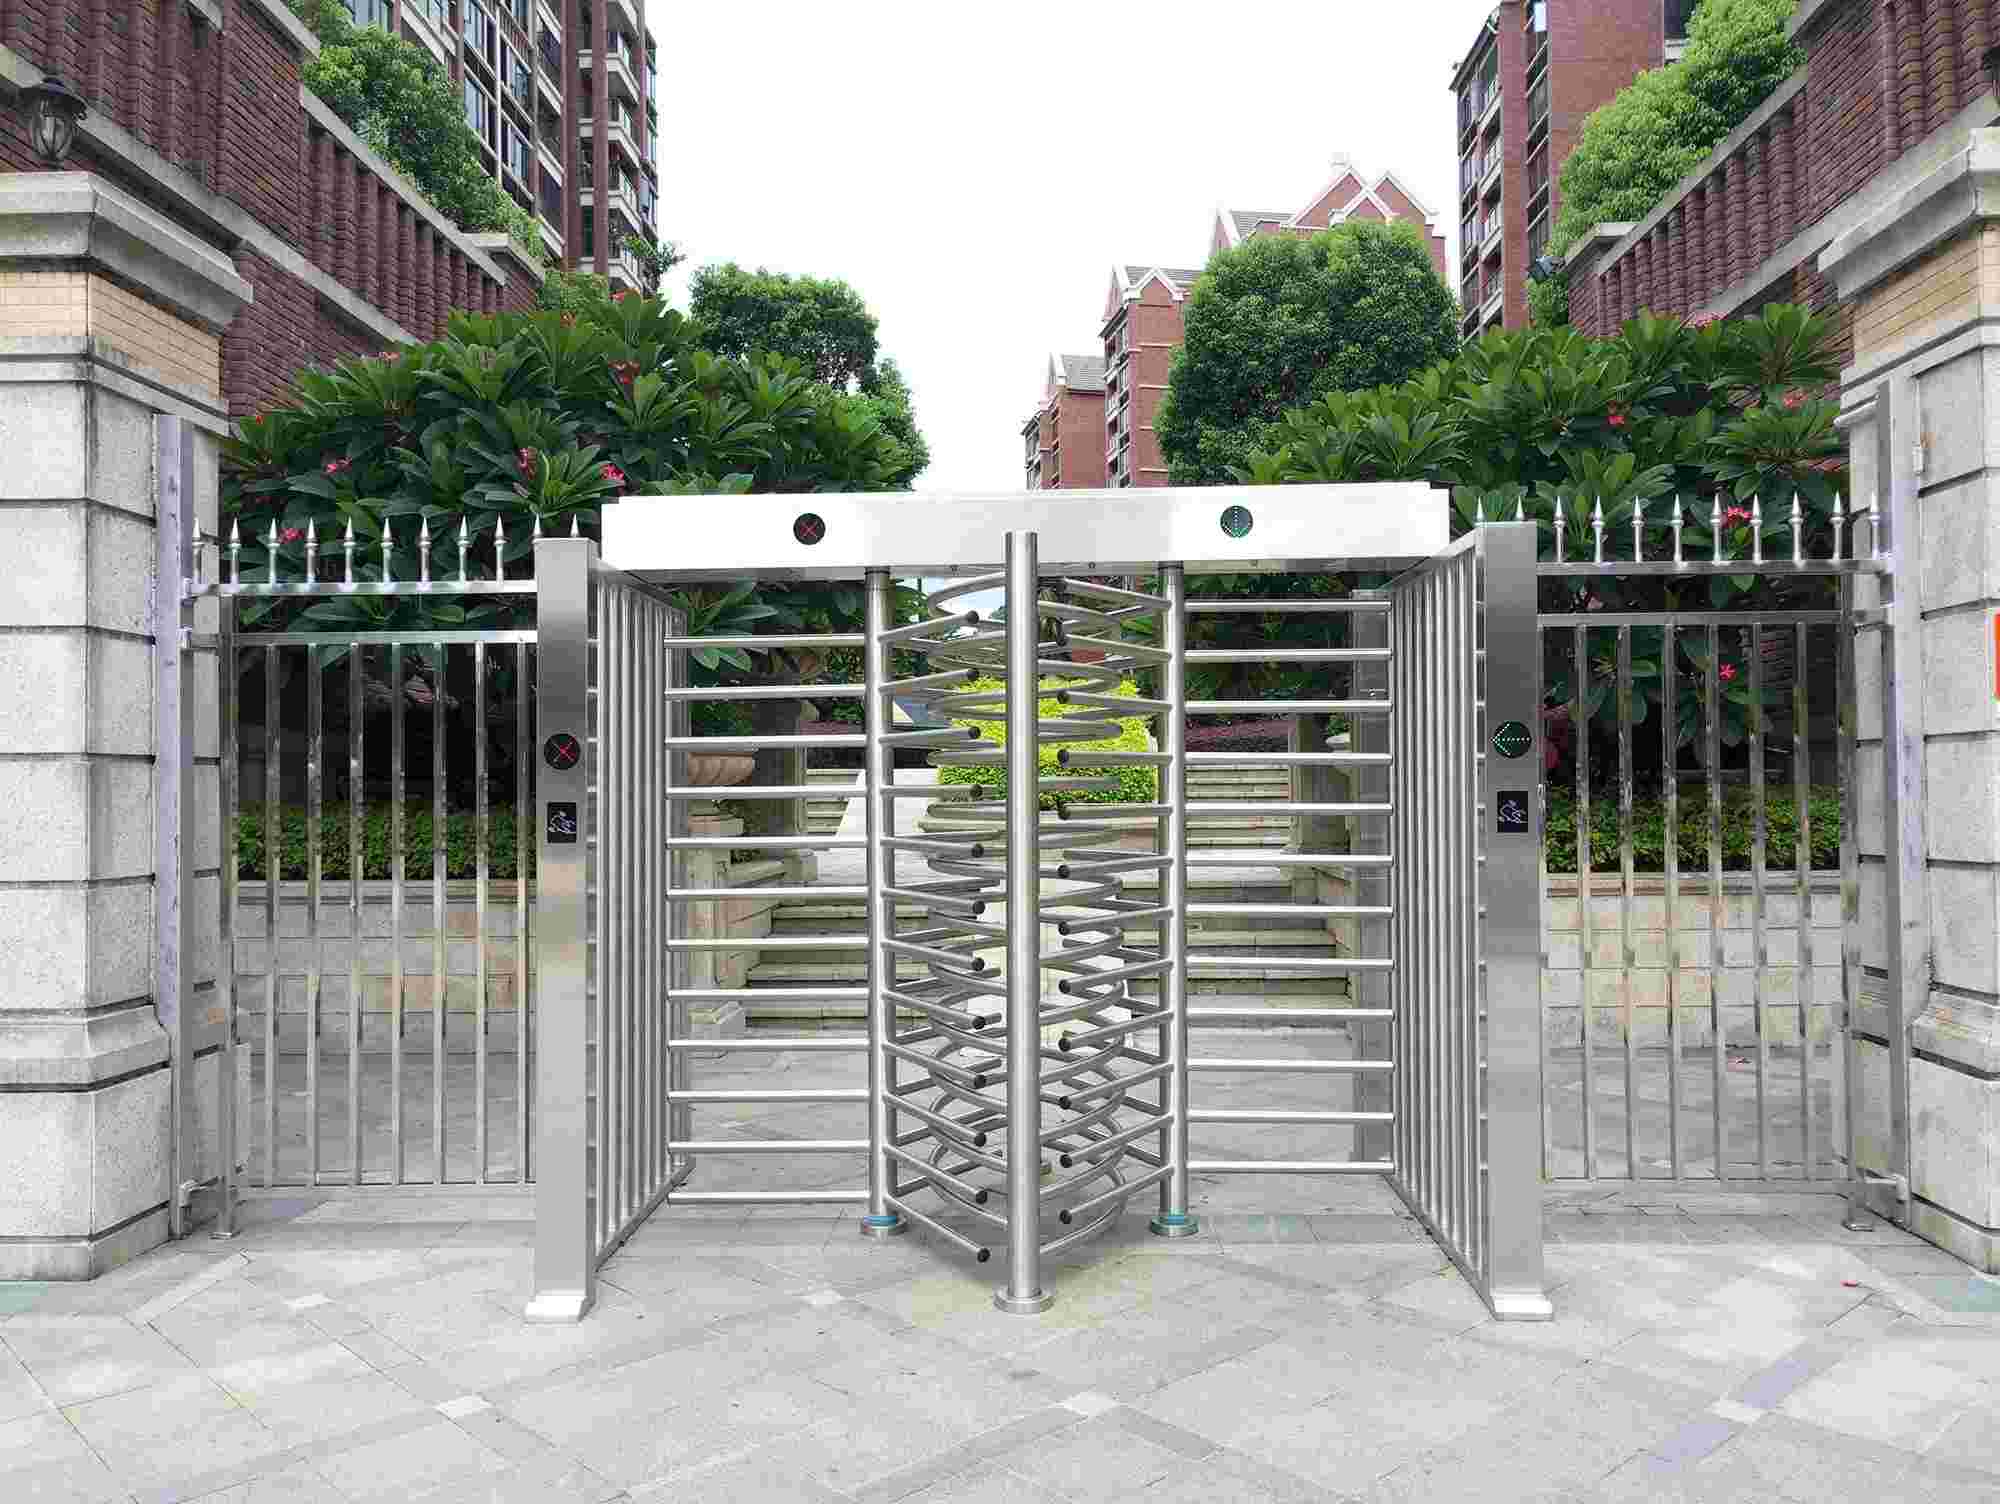 How many do you know about the highest security level full height turnstile?